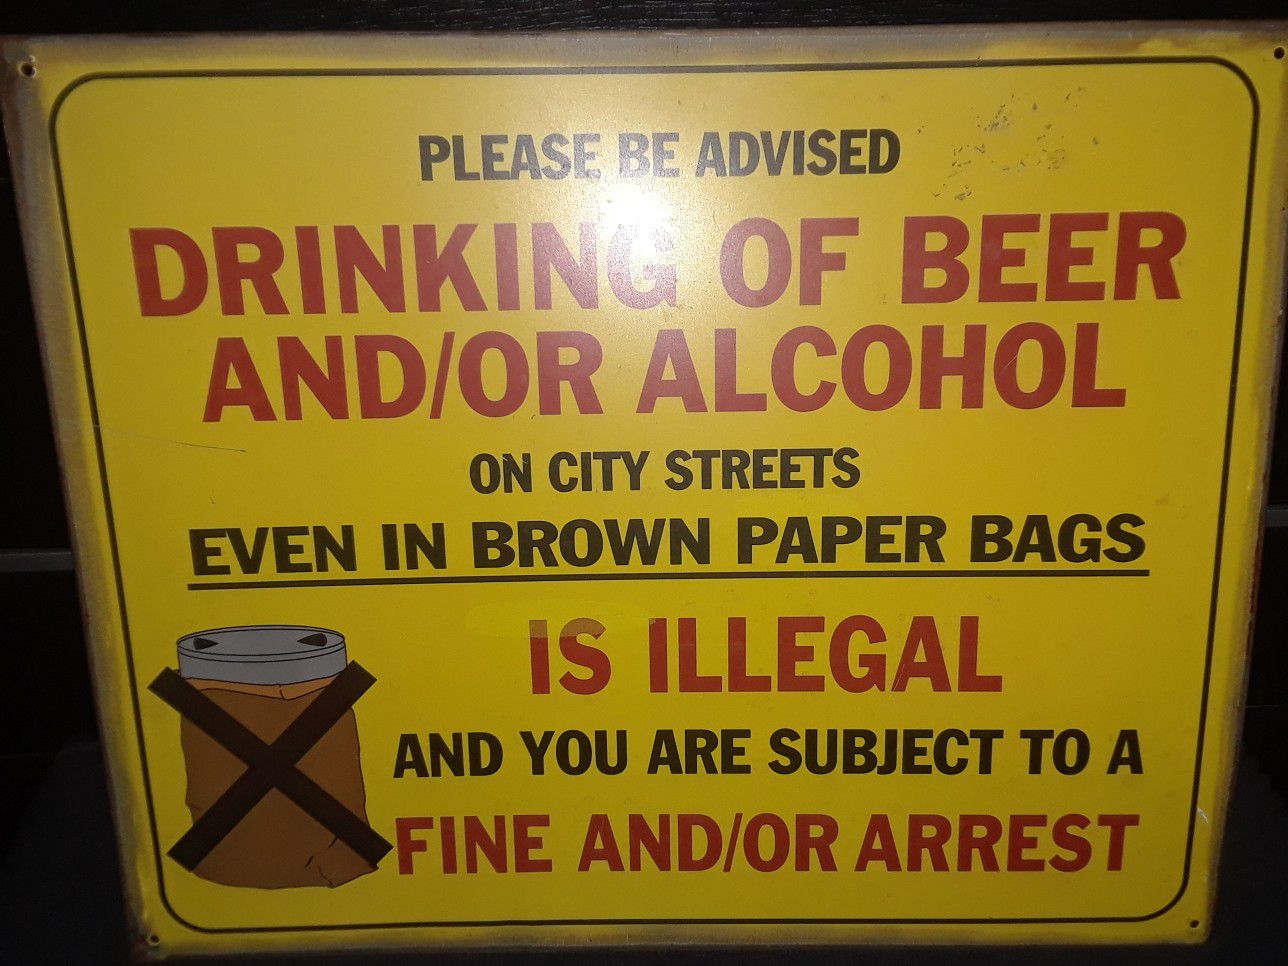 Drinking Alcohol In Public Even In Brown Paper Bags Illegal" Metal Tin Sign